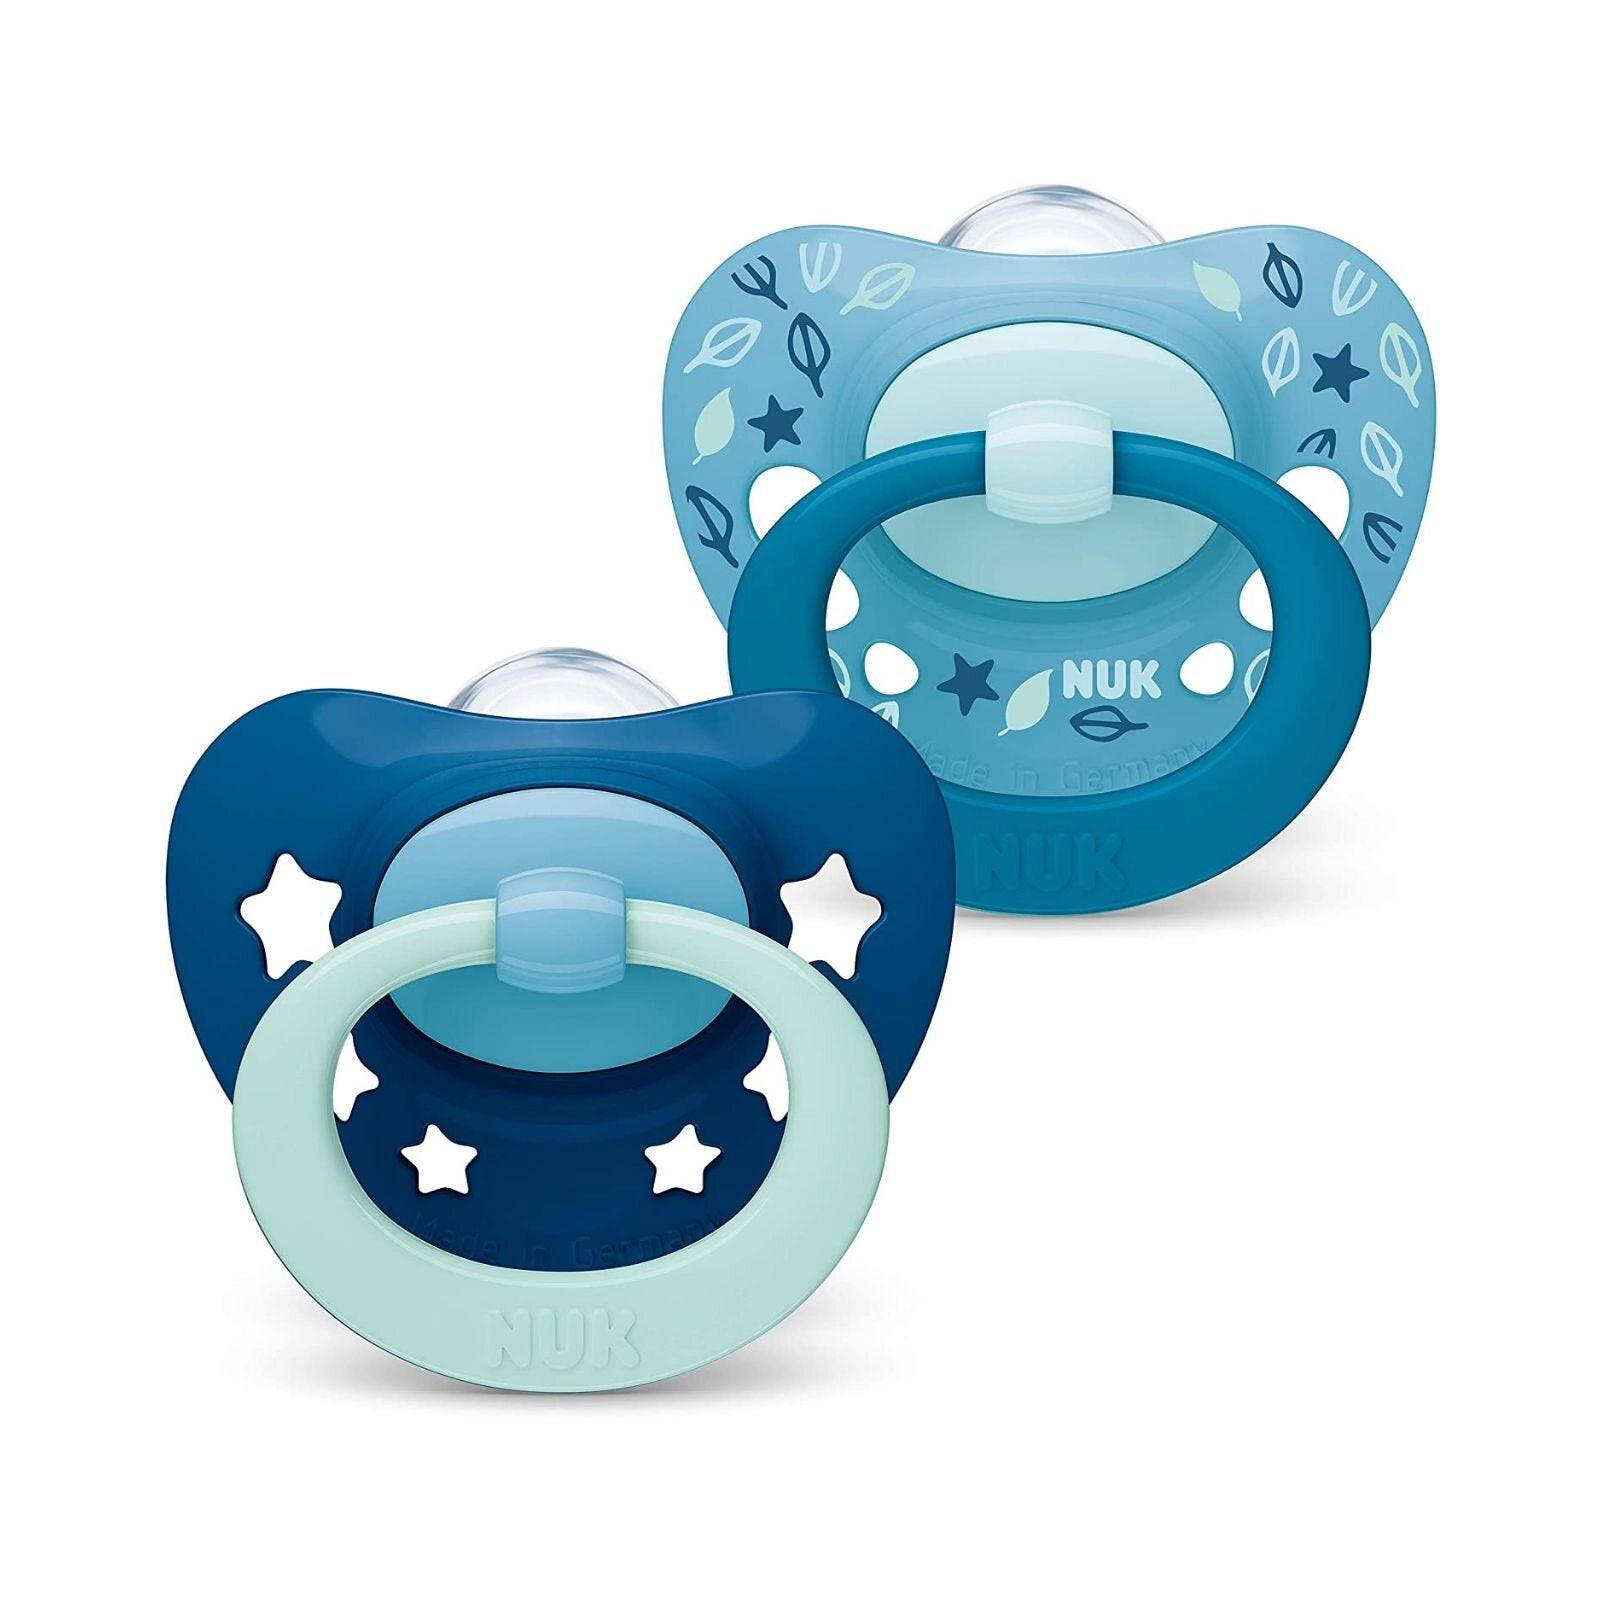 NUK Signature Silicone Soothers - Blue